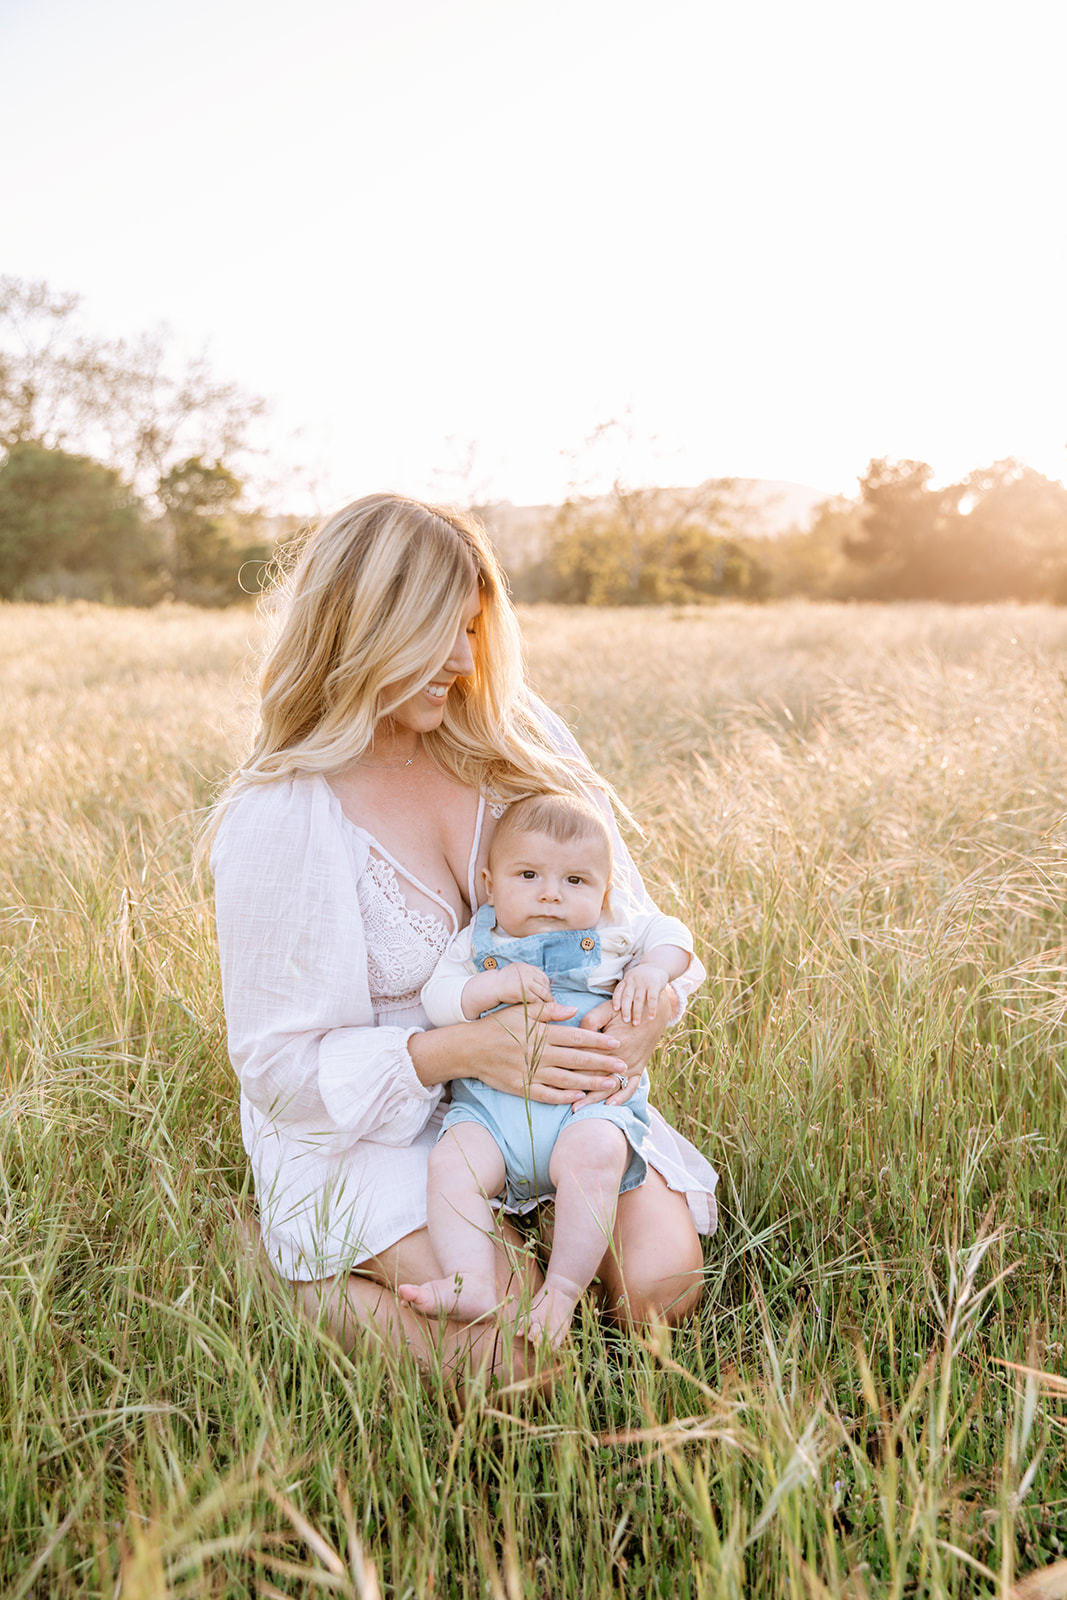 A new mom kneels in a field of tall grass with her infant son in her lap wearing blue overalls at sunset after a visit to The New Children's Museum